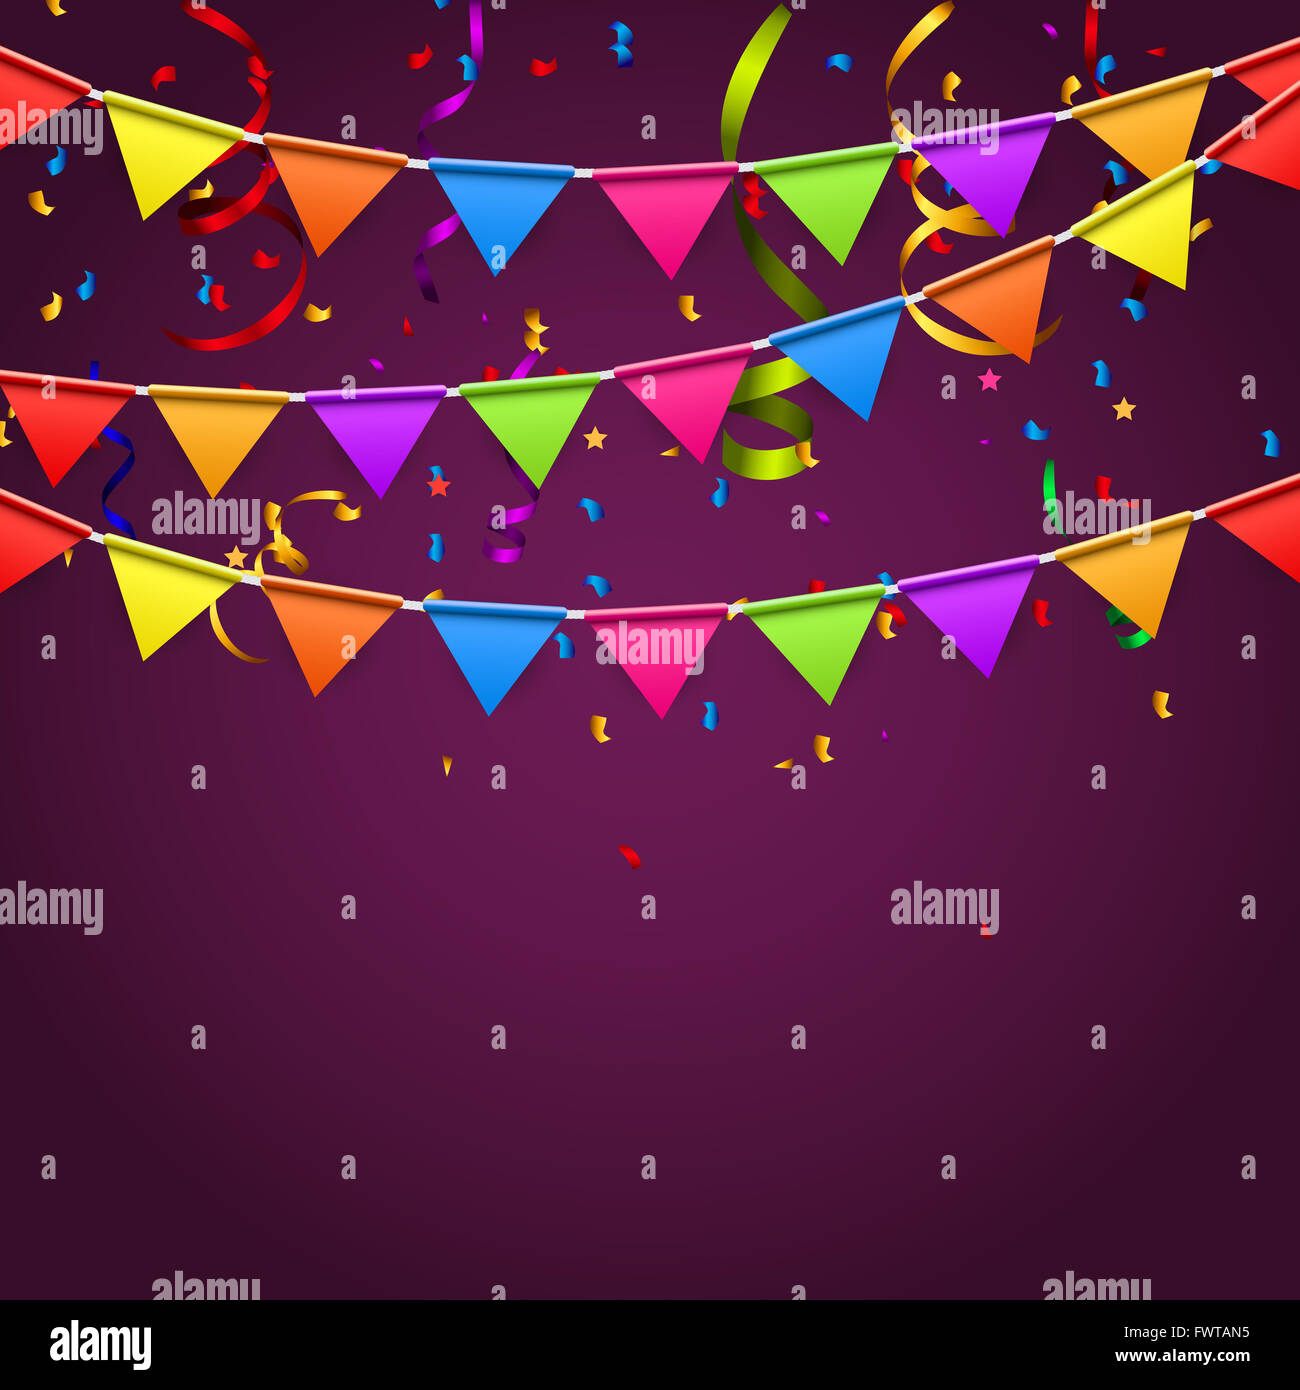 Party Background with Flags Illustration Stock Photo - Alamy